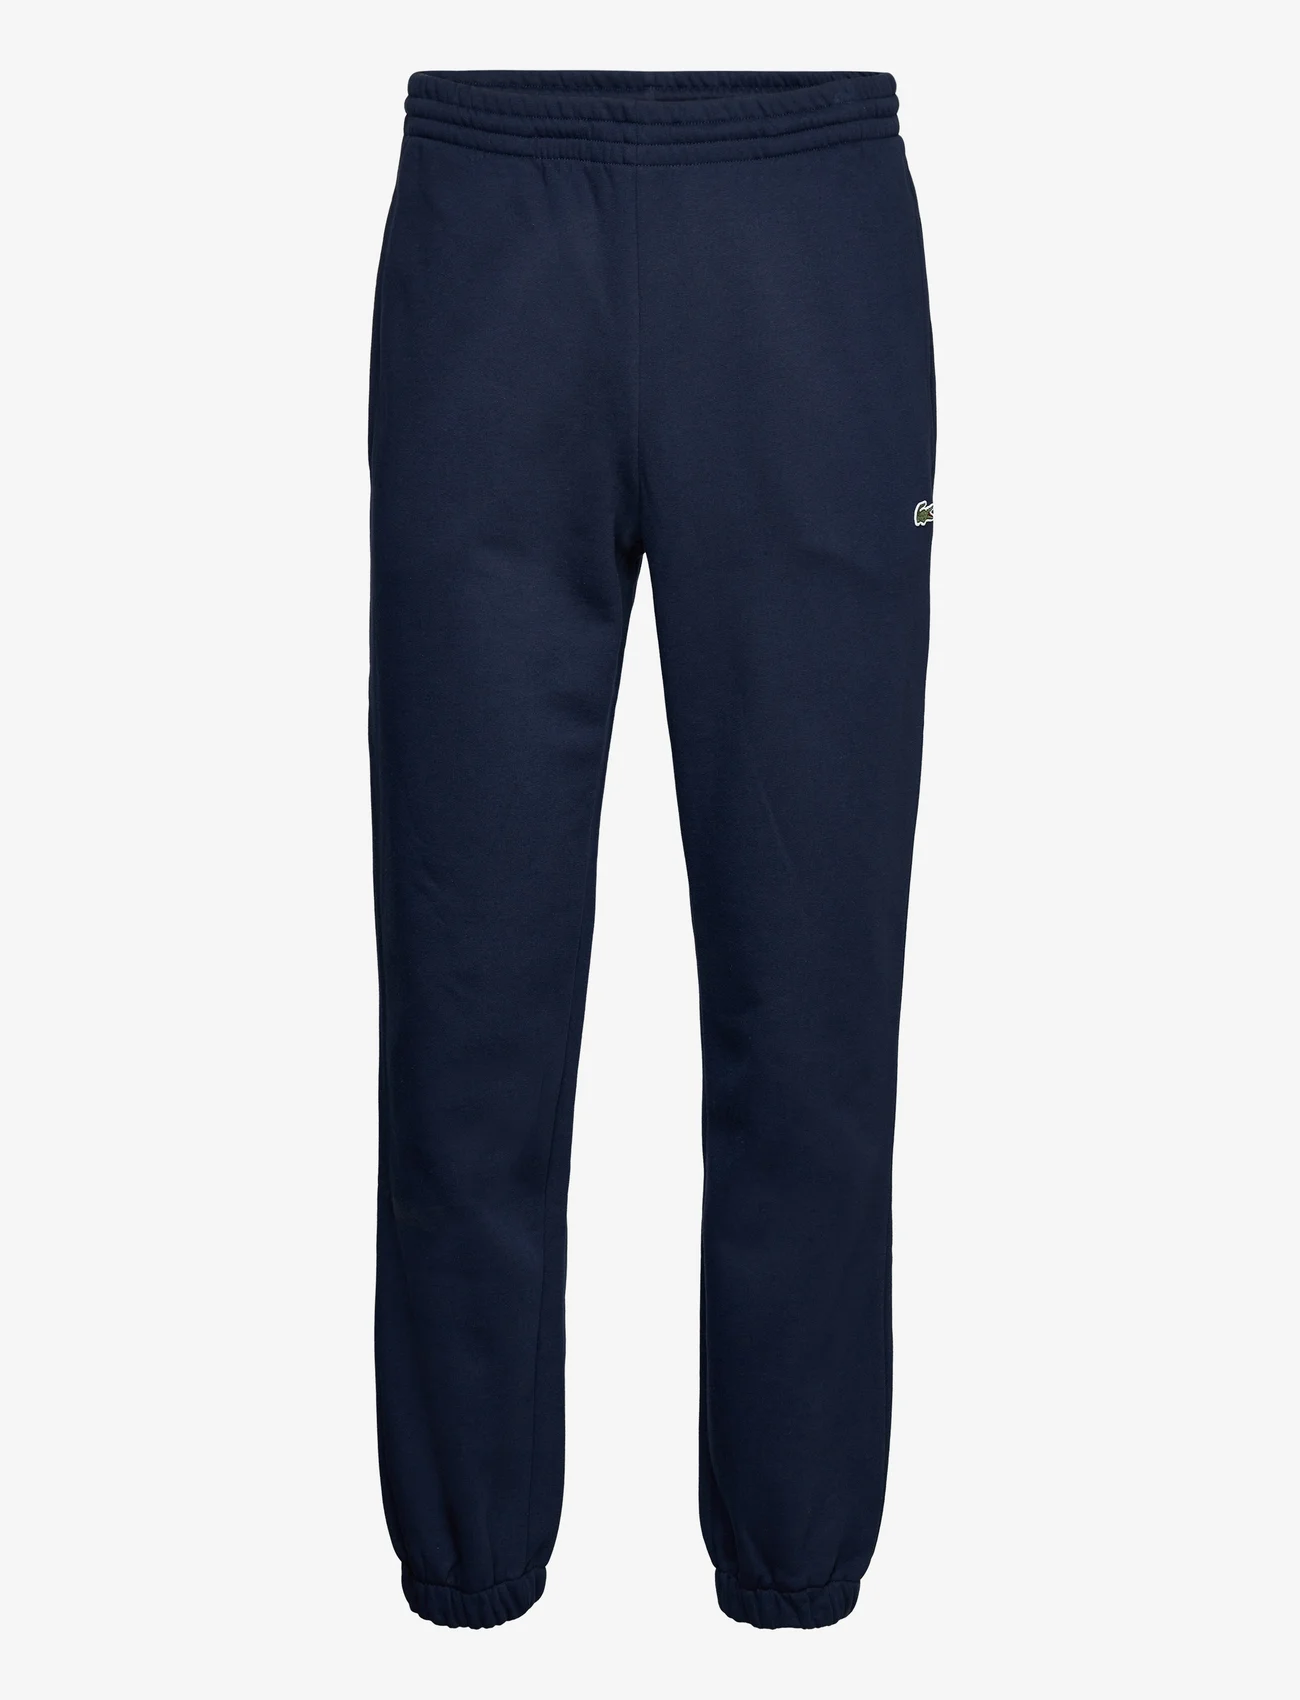 Lacoste - TRACKSUITS & TRACK TR - sweatpants - navy blue - 0